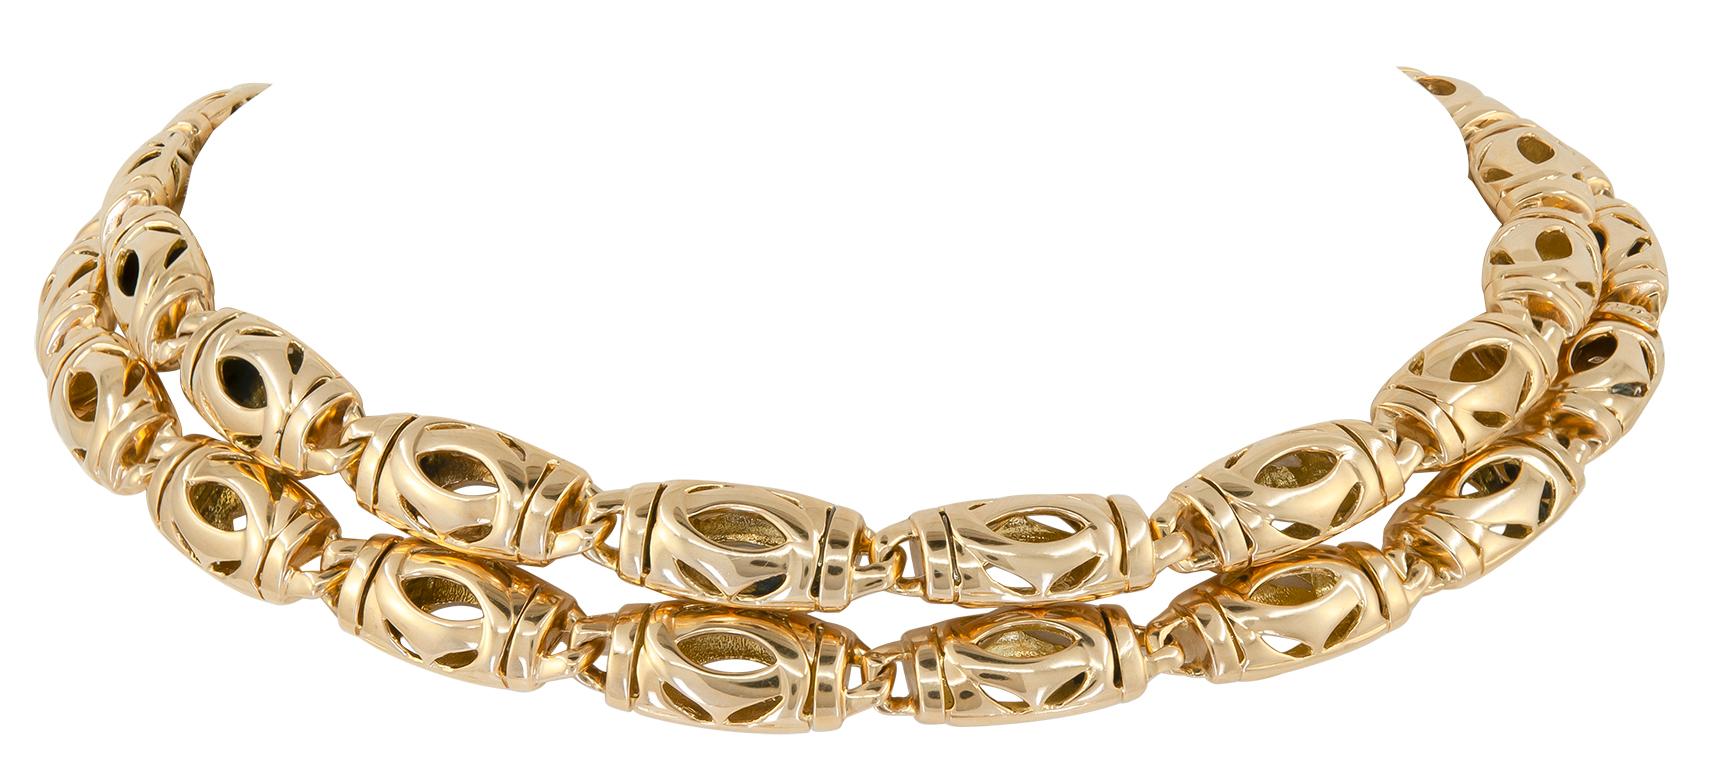 CARTIER Double “C” Bracelet/Necklace

An 18k yellow gold double “C” bracelet/necklace signed Cartier.

Measures approx. 26.5″ in total length
Necklace only approx. 18.5″ in length
Bracelet only approx. 8″ in length
Stamped “Cartier” and numbered;